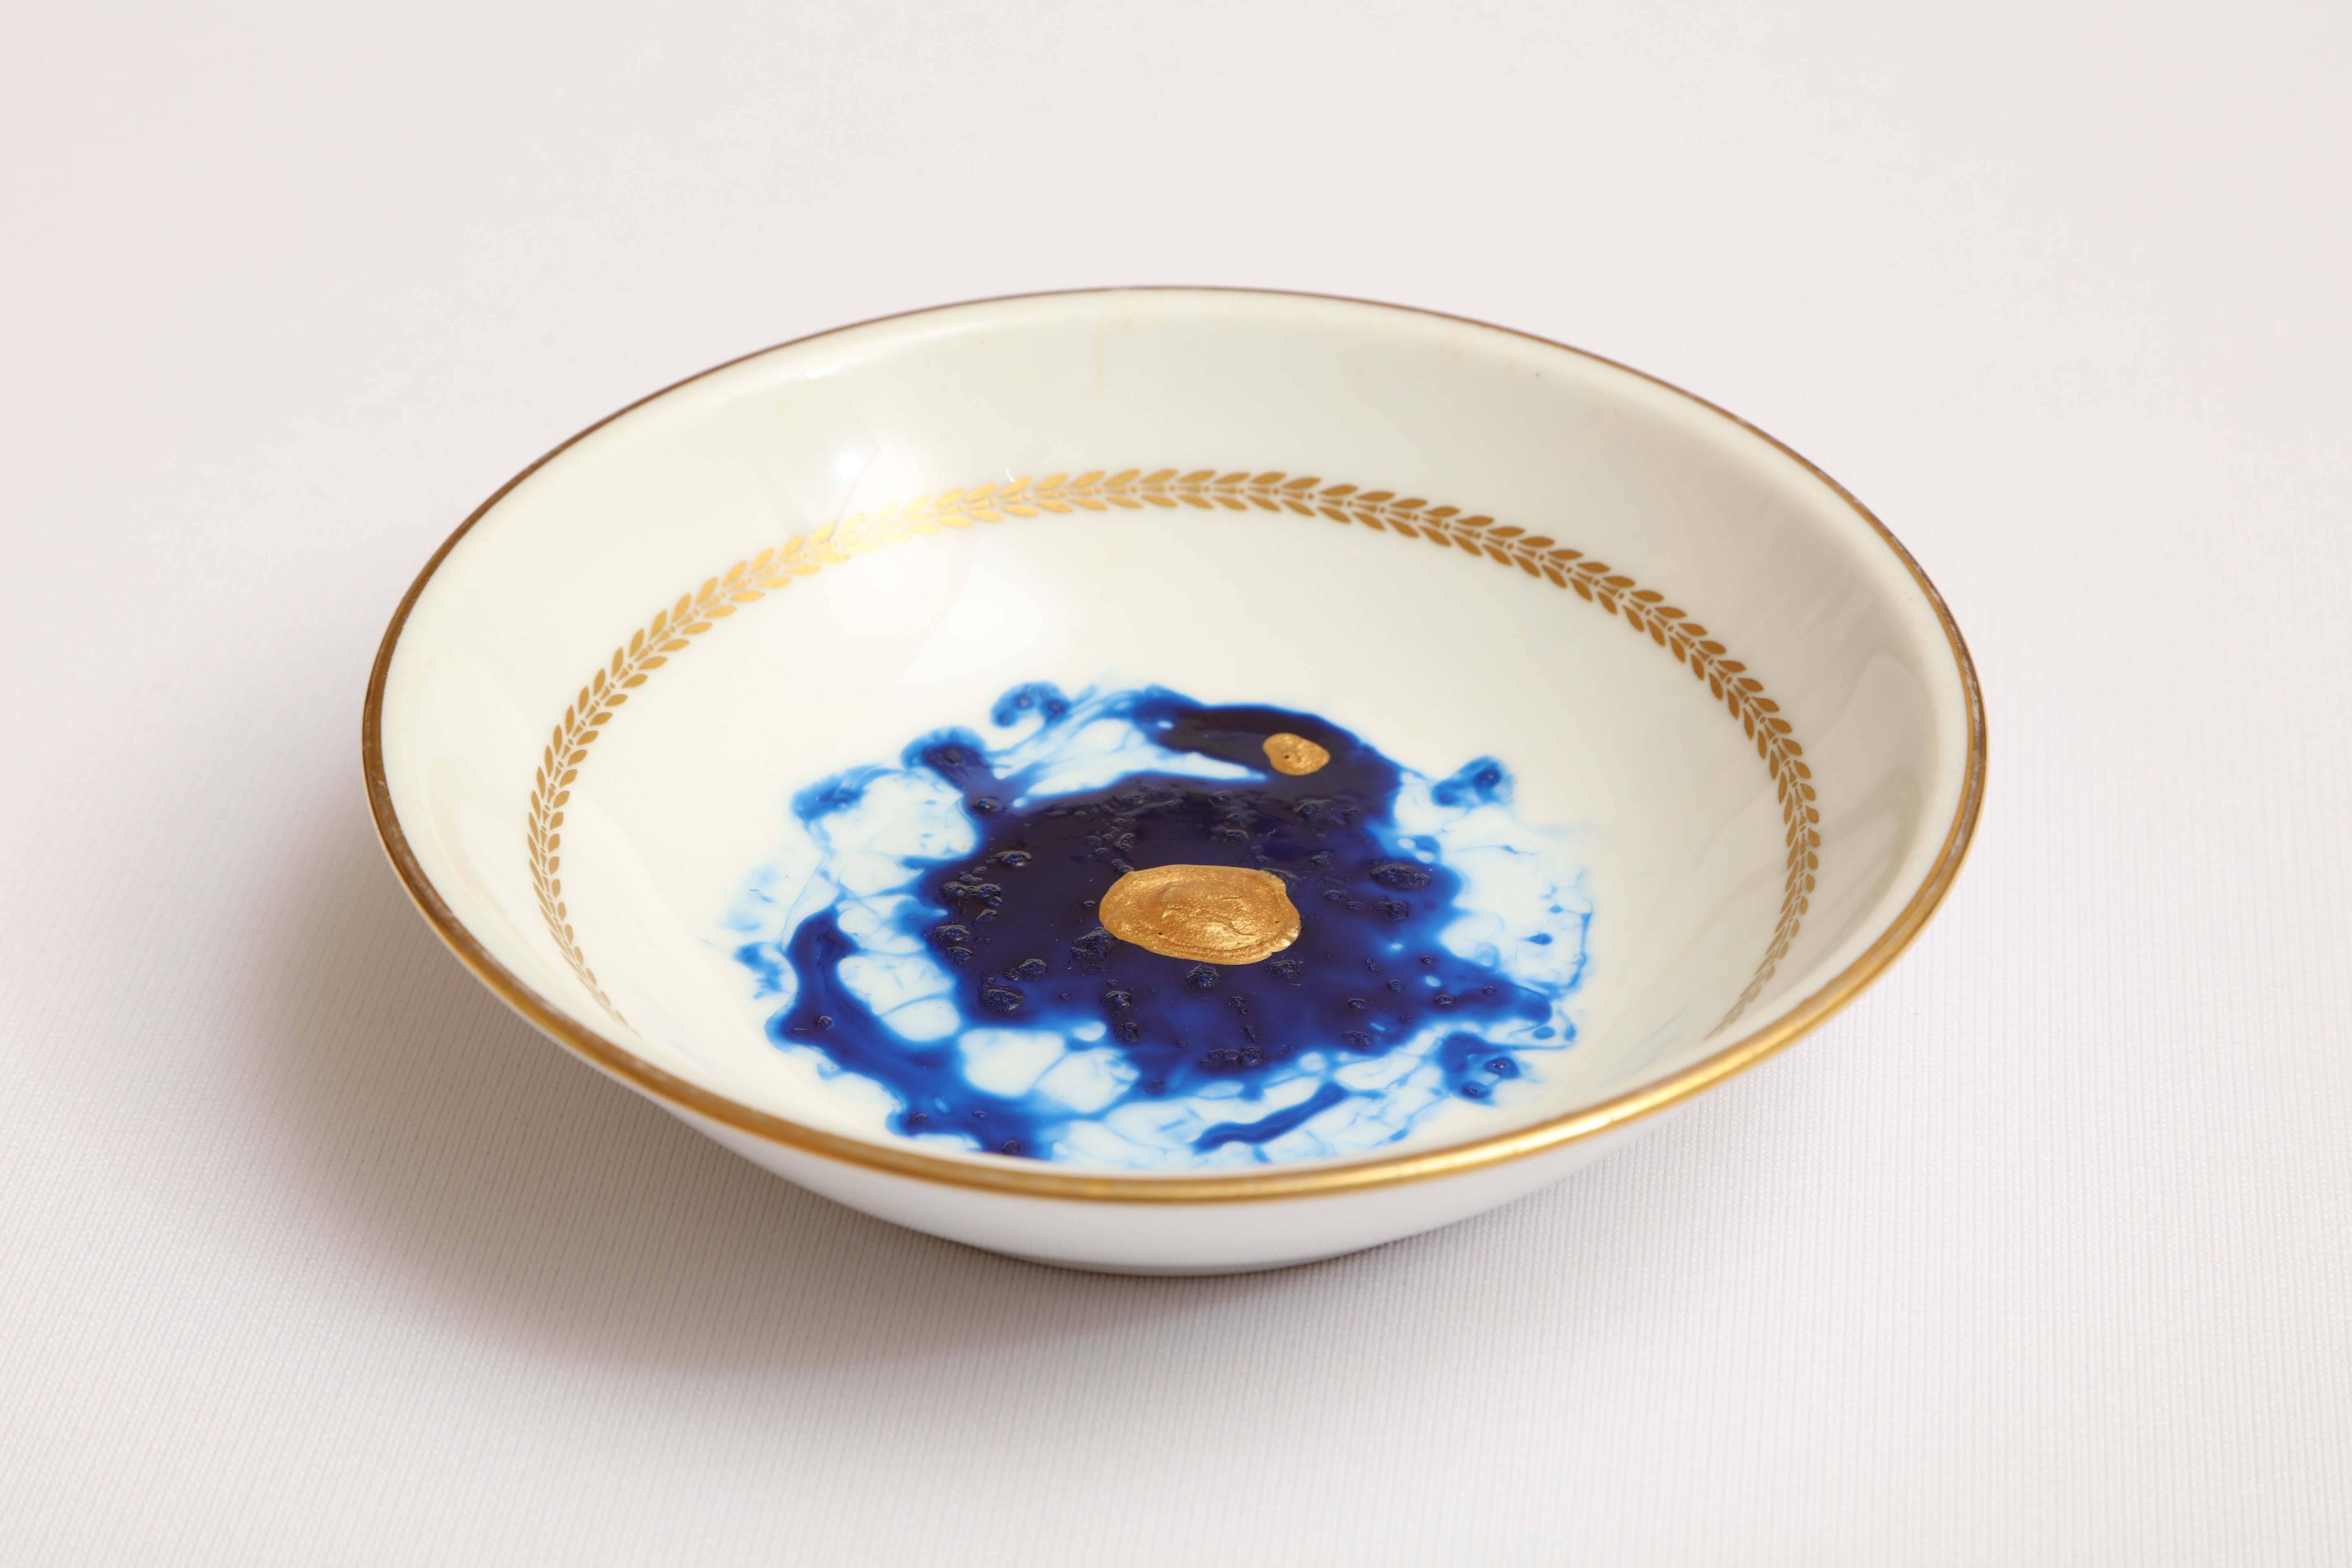 #5 plate for the Ocean collection.
Hand-painted on repurposed German porcelain and baked individually.
This plate is also part of a large collection on Ocean plates.
Peter Valcarcel is a celebrated American Peruvian Home Accessories Designer and